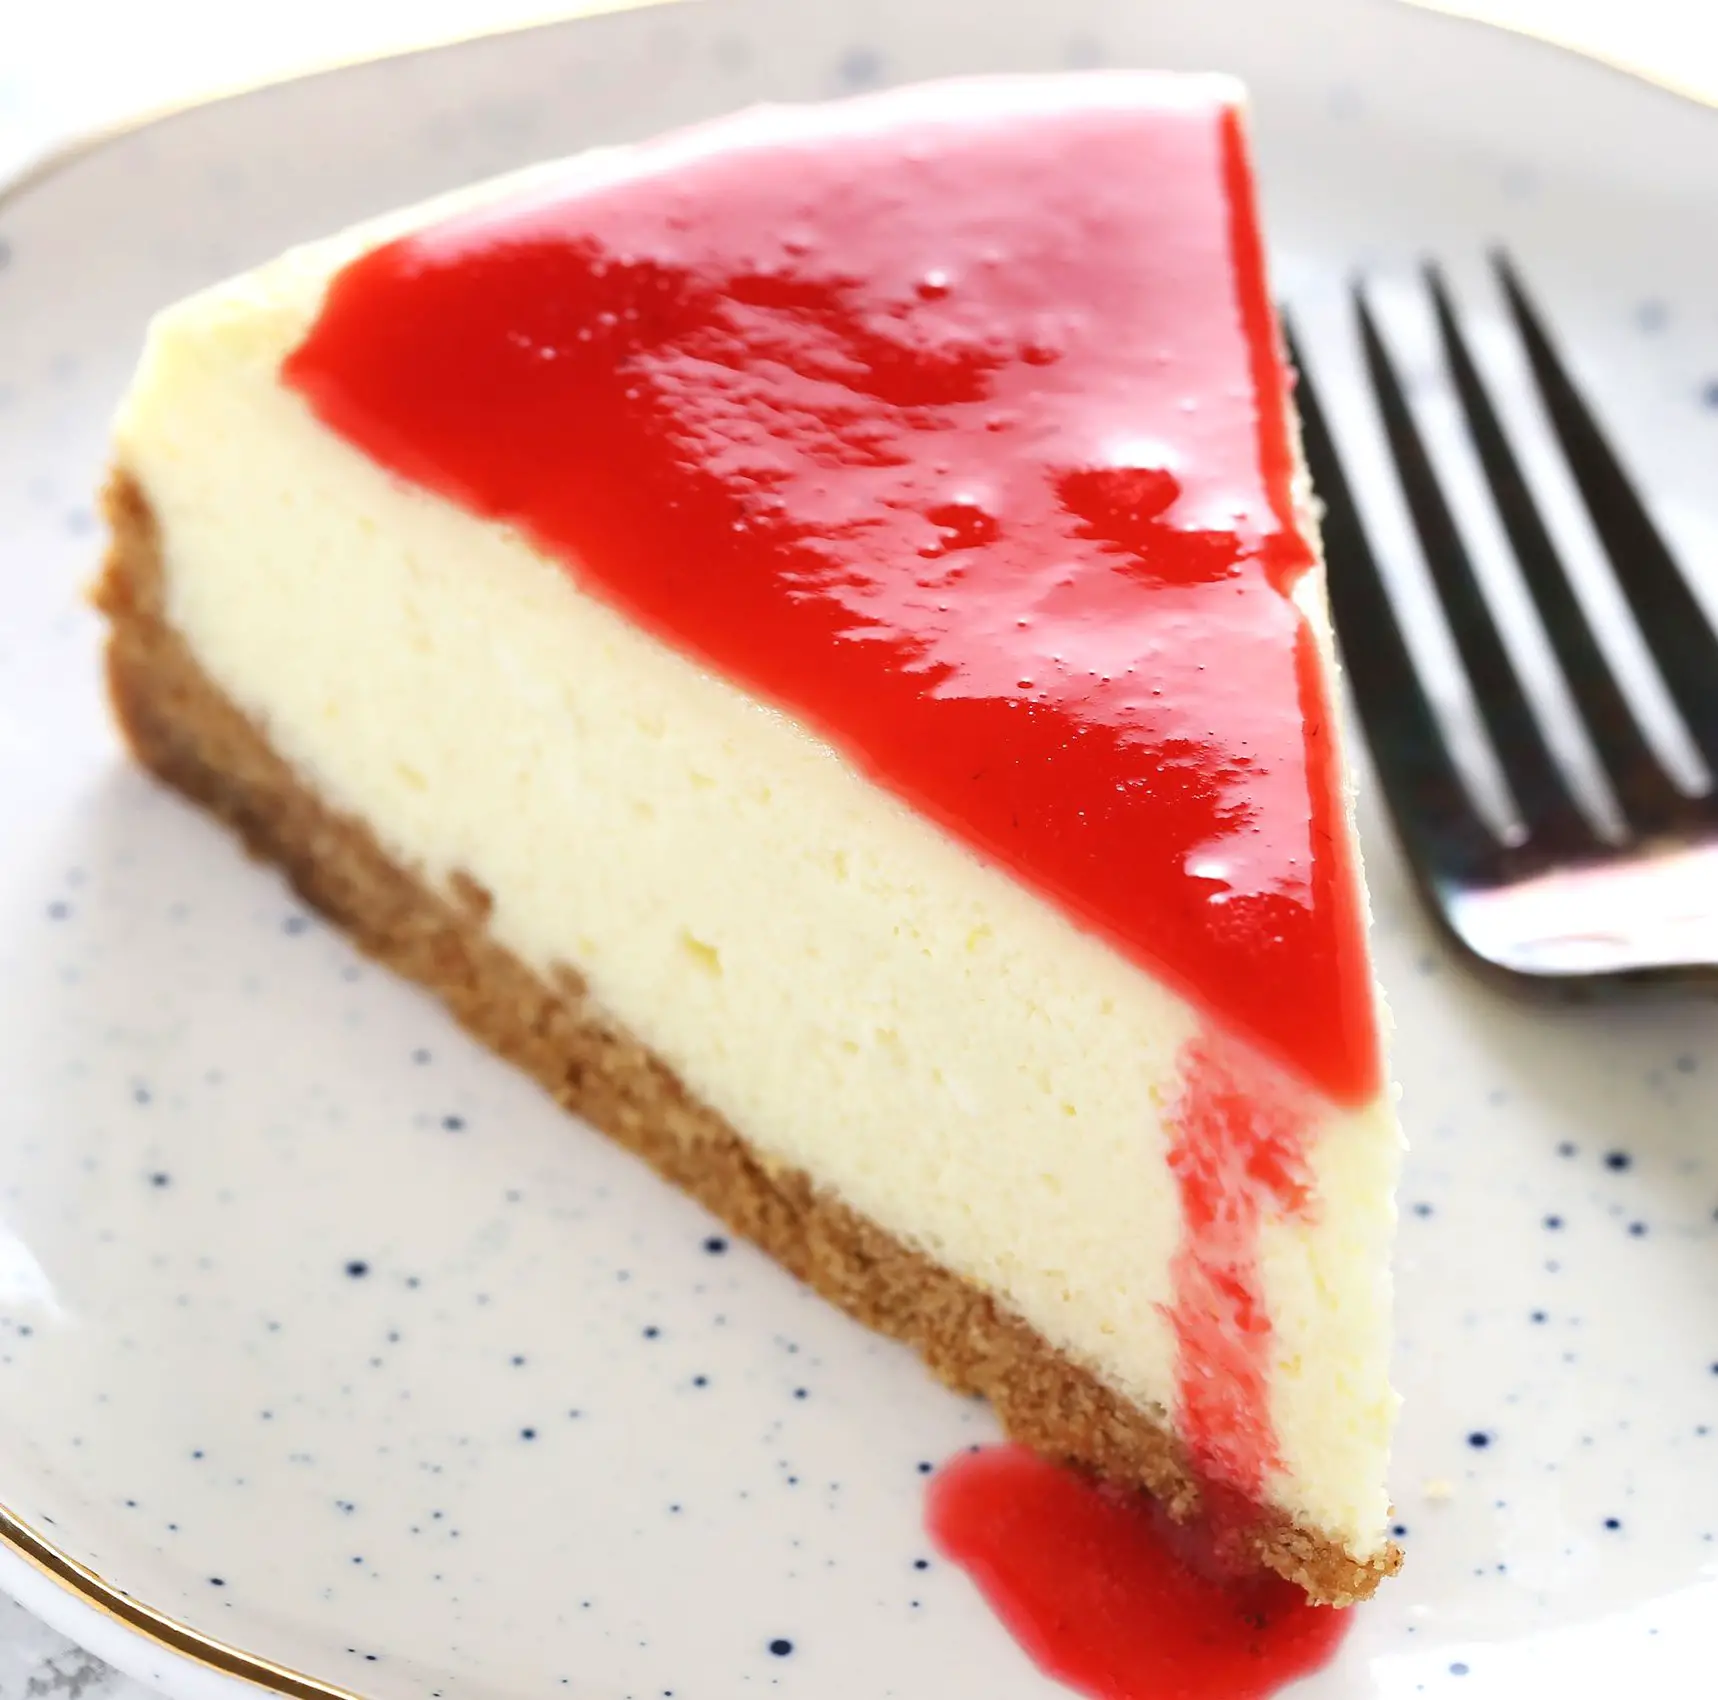 Le cheesecake : qjuel fromage utiliser ? 